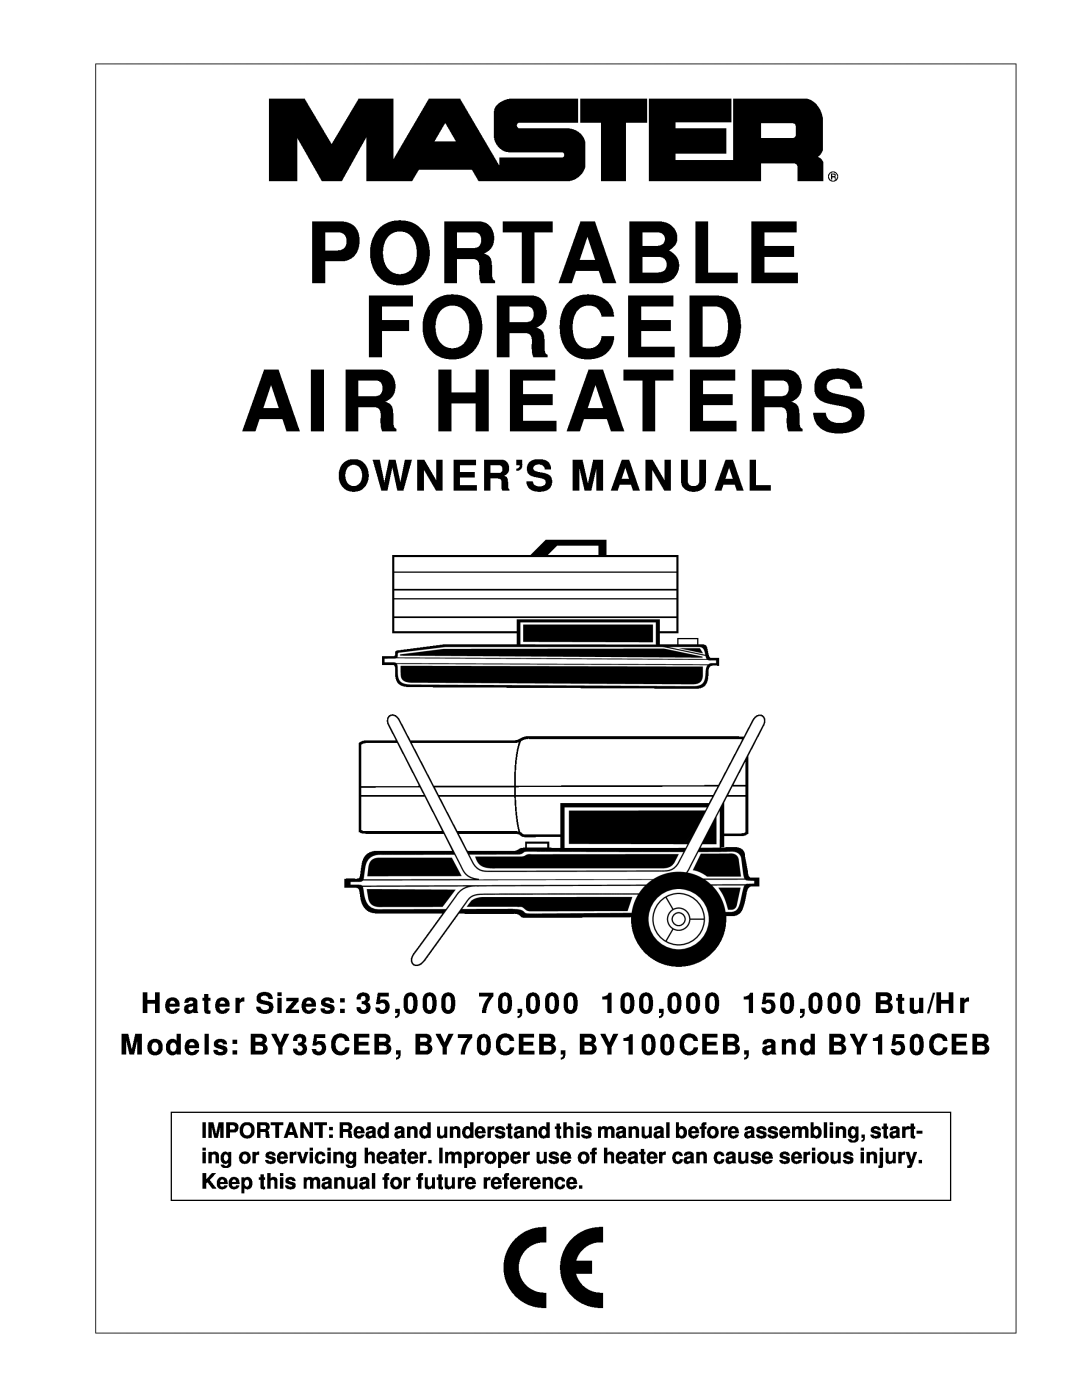 Desa owner manual Models BY35CEB, BY70CEB, BY100CEB, and BY150CEB, Portable Forced Air Heaters 